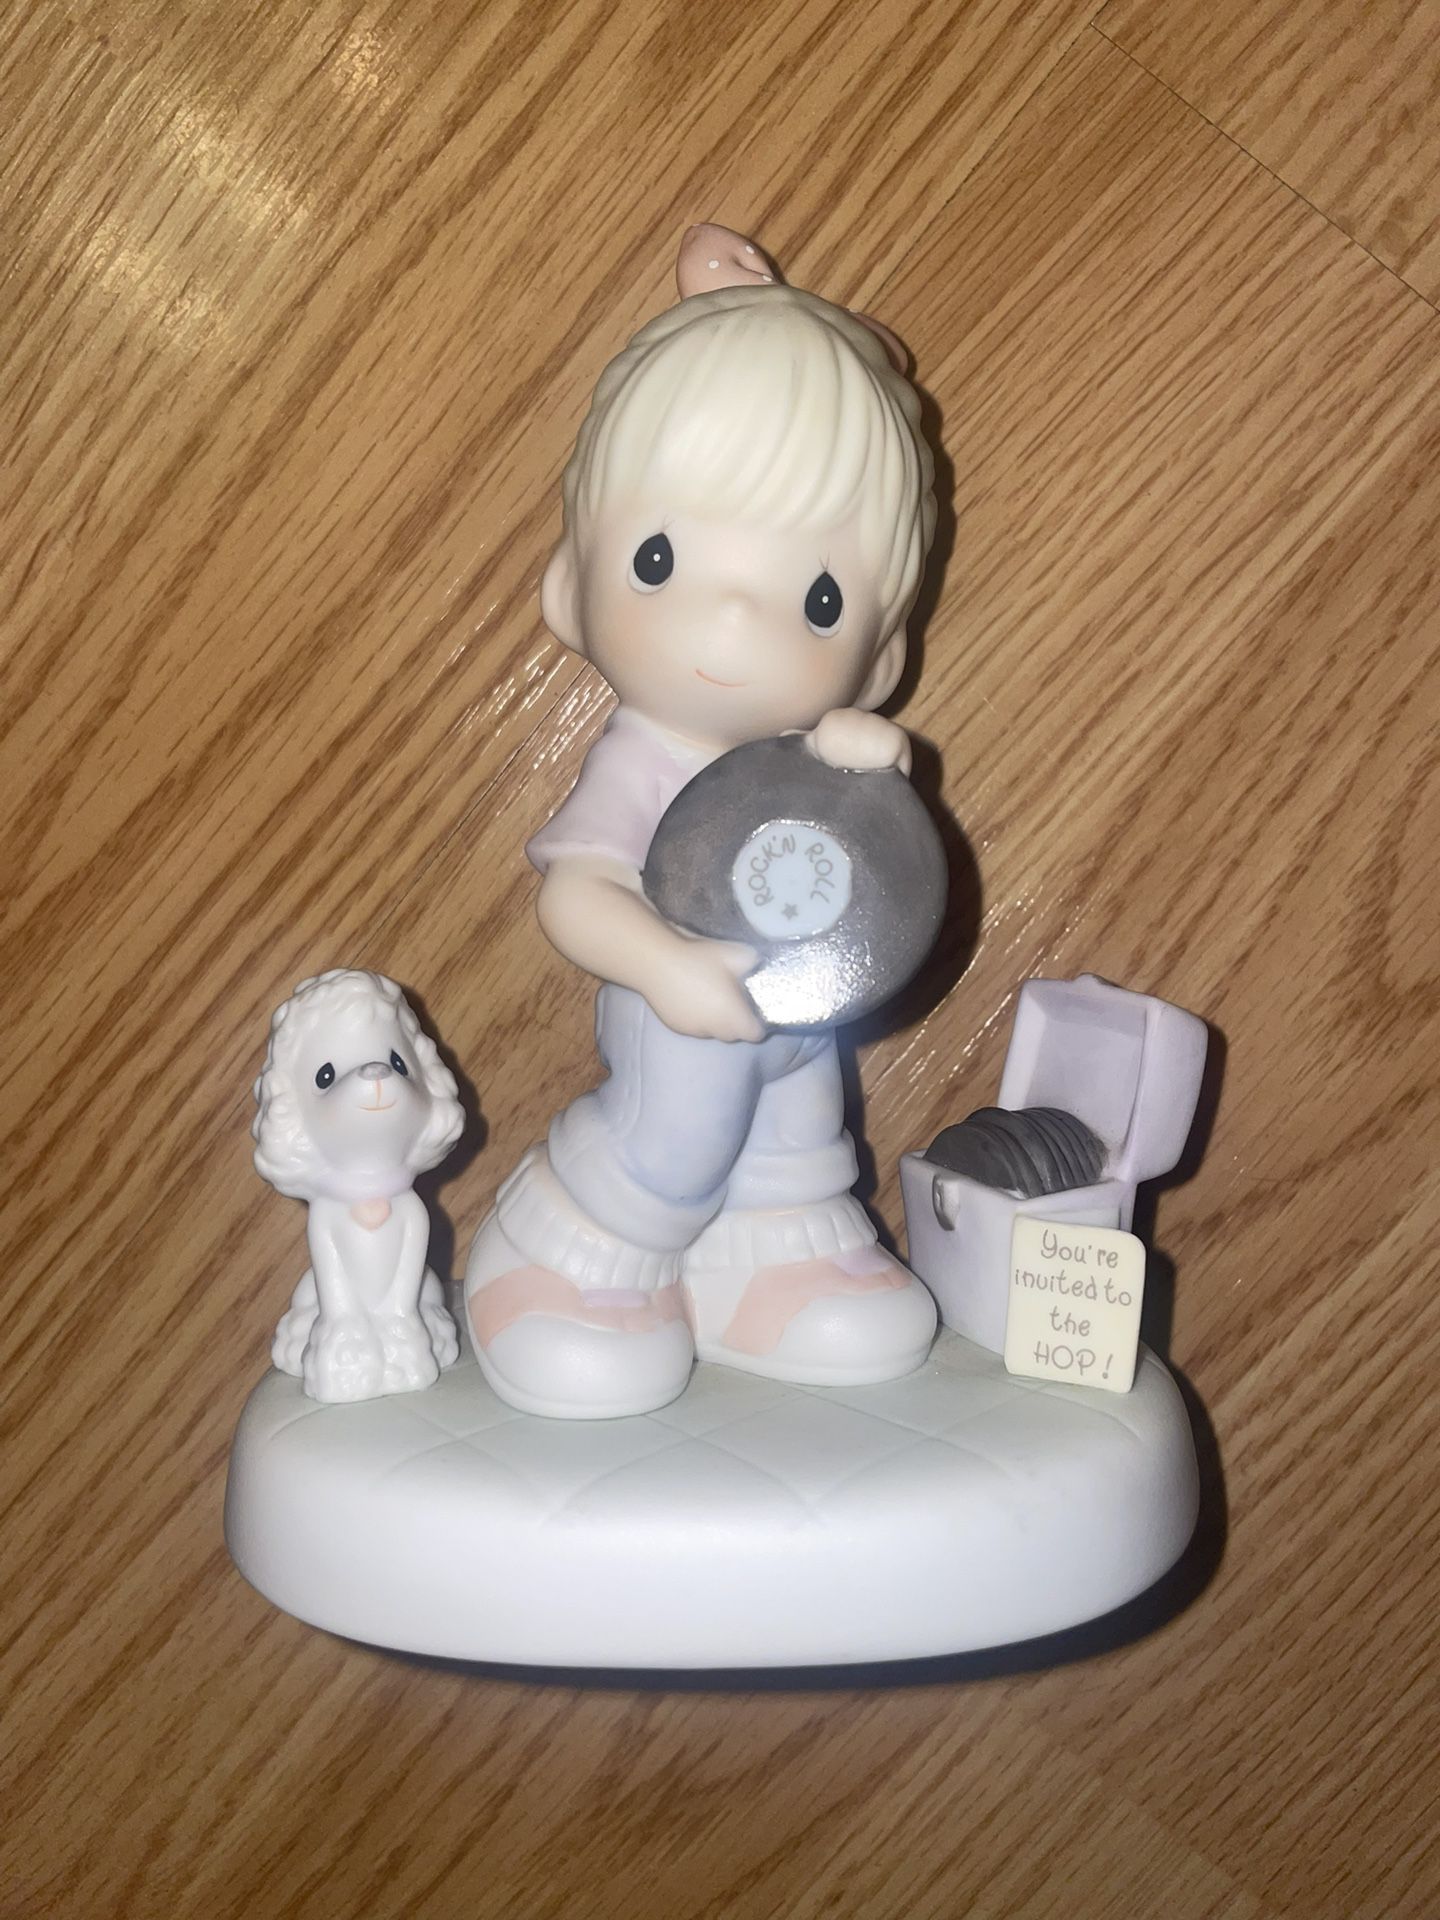 Precious Moments Figurine “Hopping For The Best”